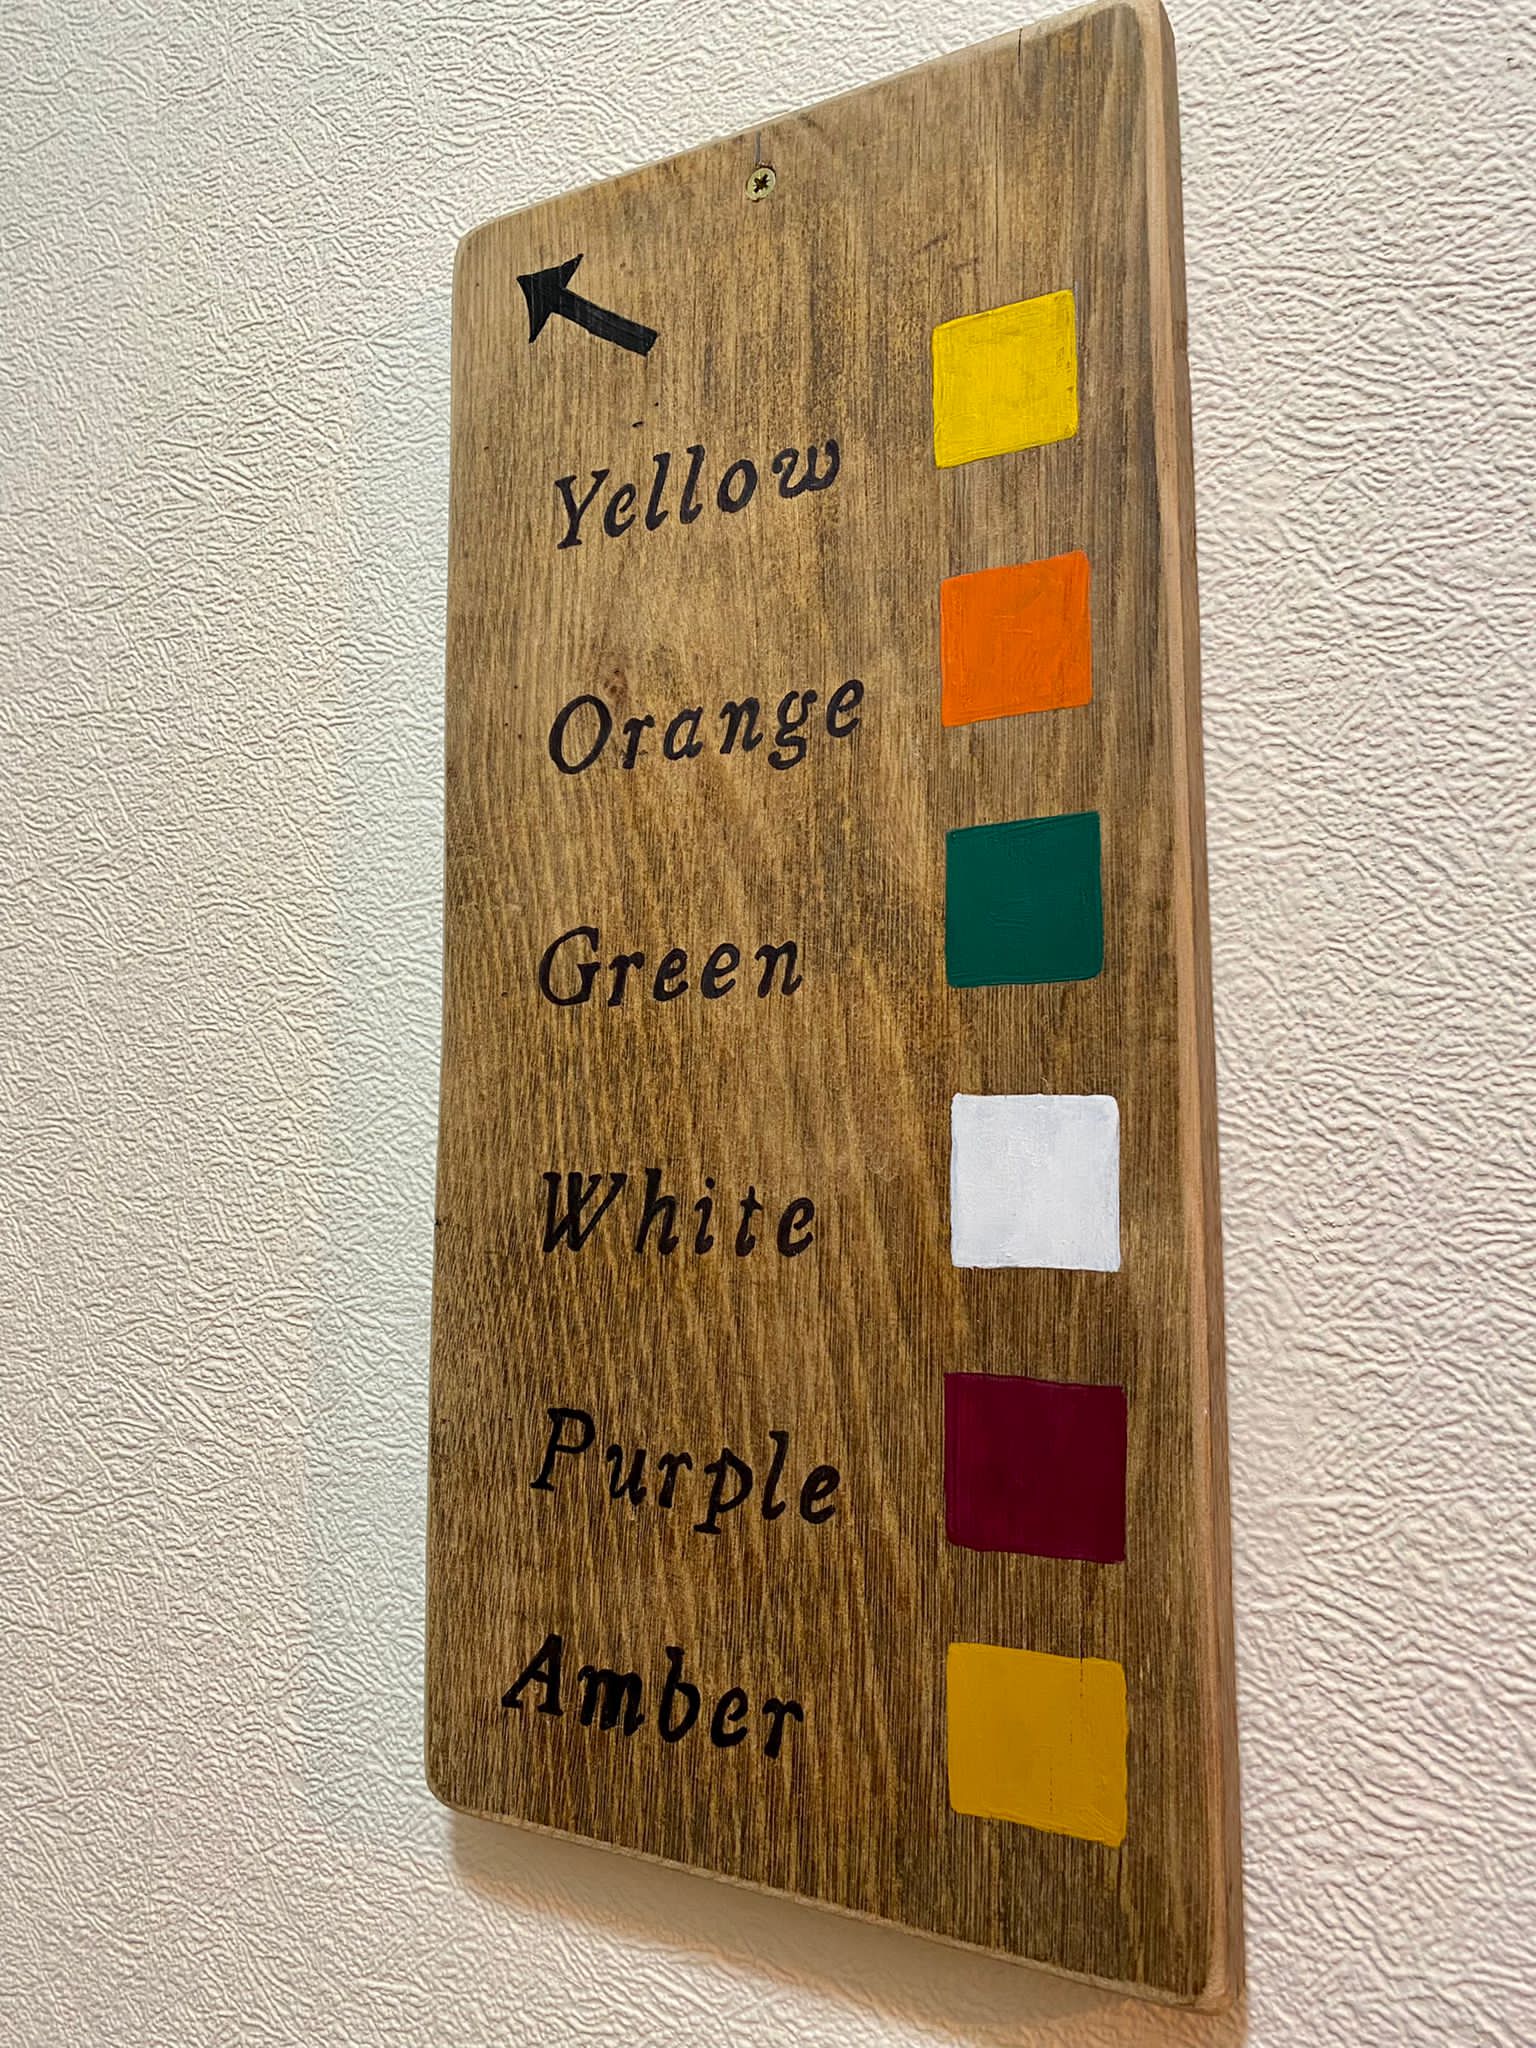 Wooden plaque with room colours and directions